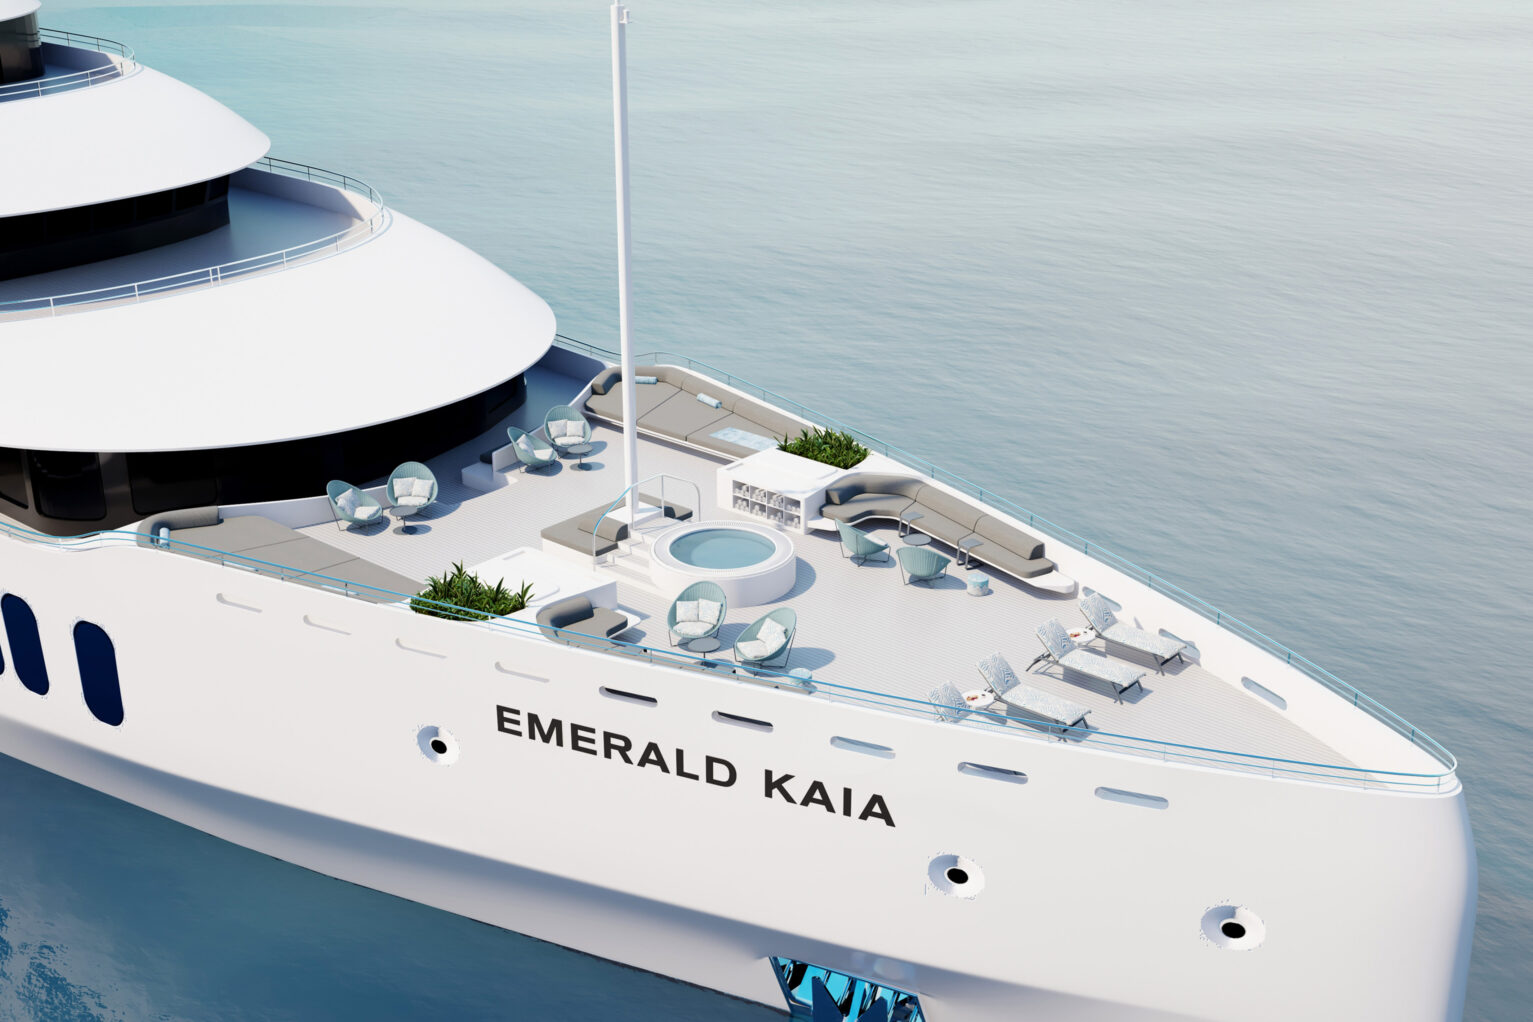 An impression of the sun deck of Emerald Kaia.